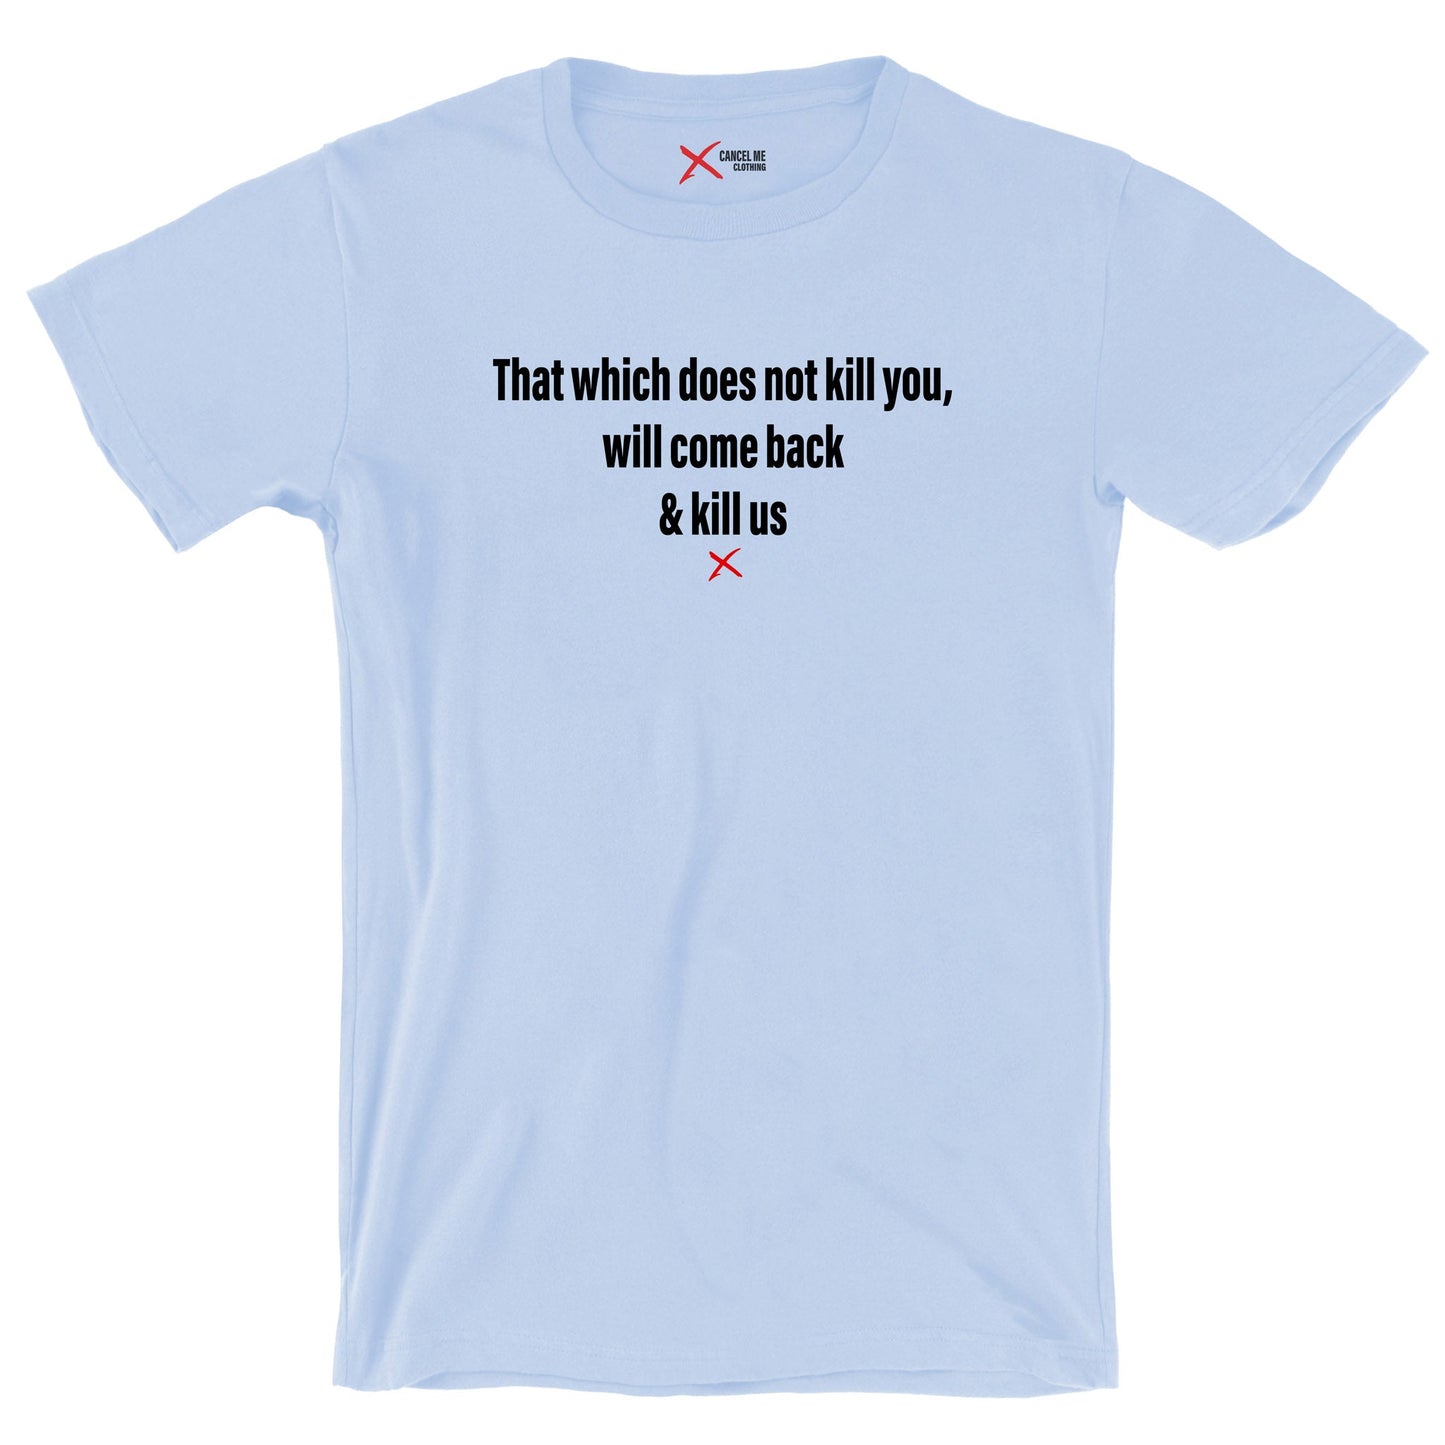 That which does not kill you, will come back & kill us - Shirt